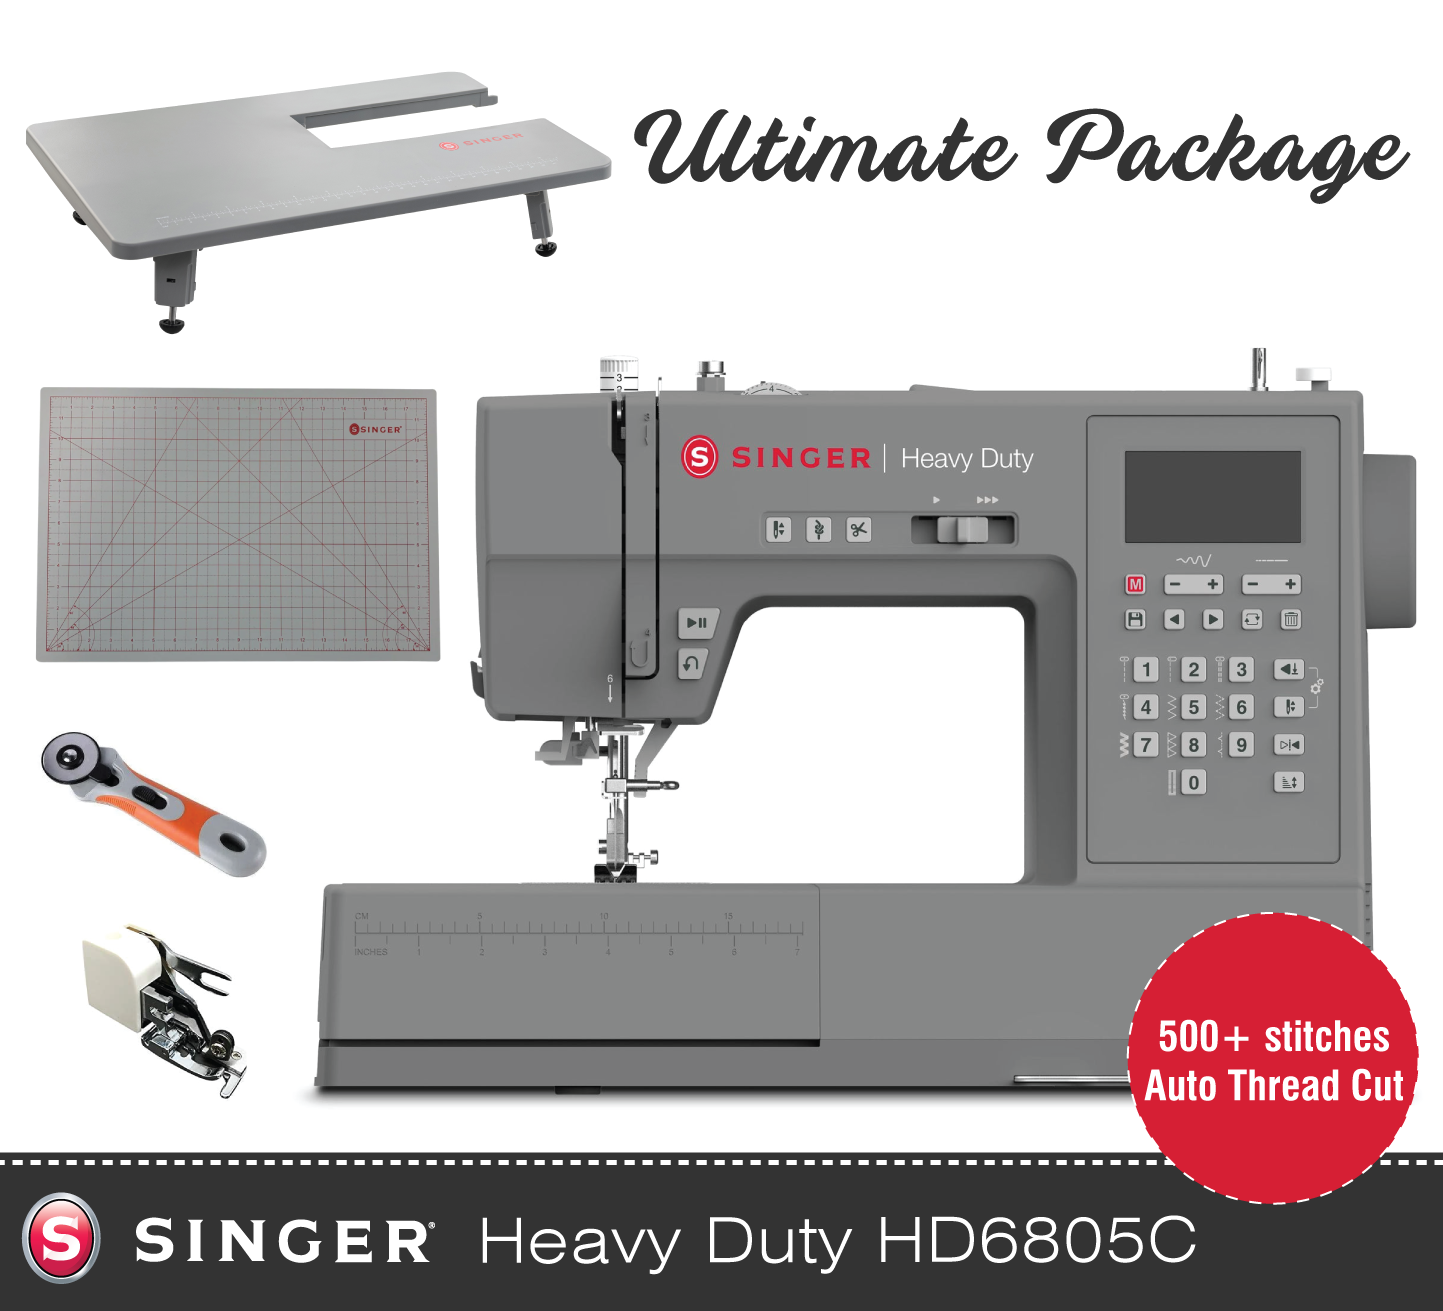 Singer Heavy Duty HD6805 Sewing Machine with auto thread cut - over 500 stitch patterns * last few remaining *